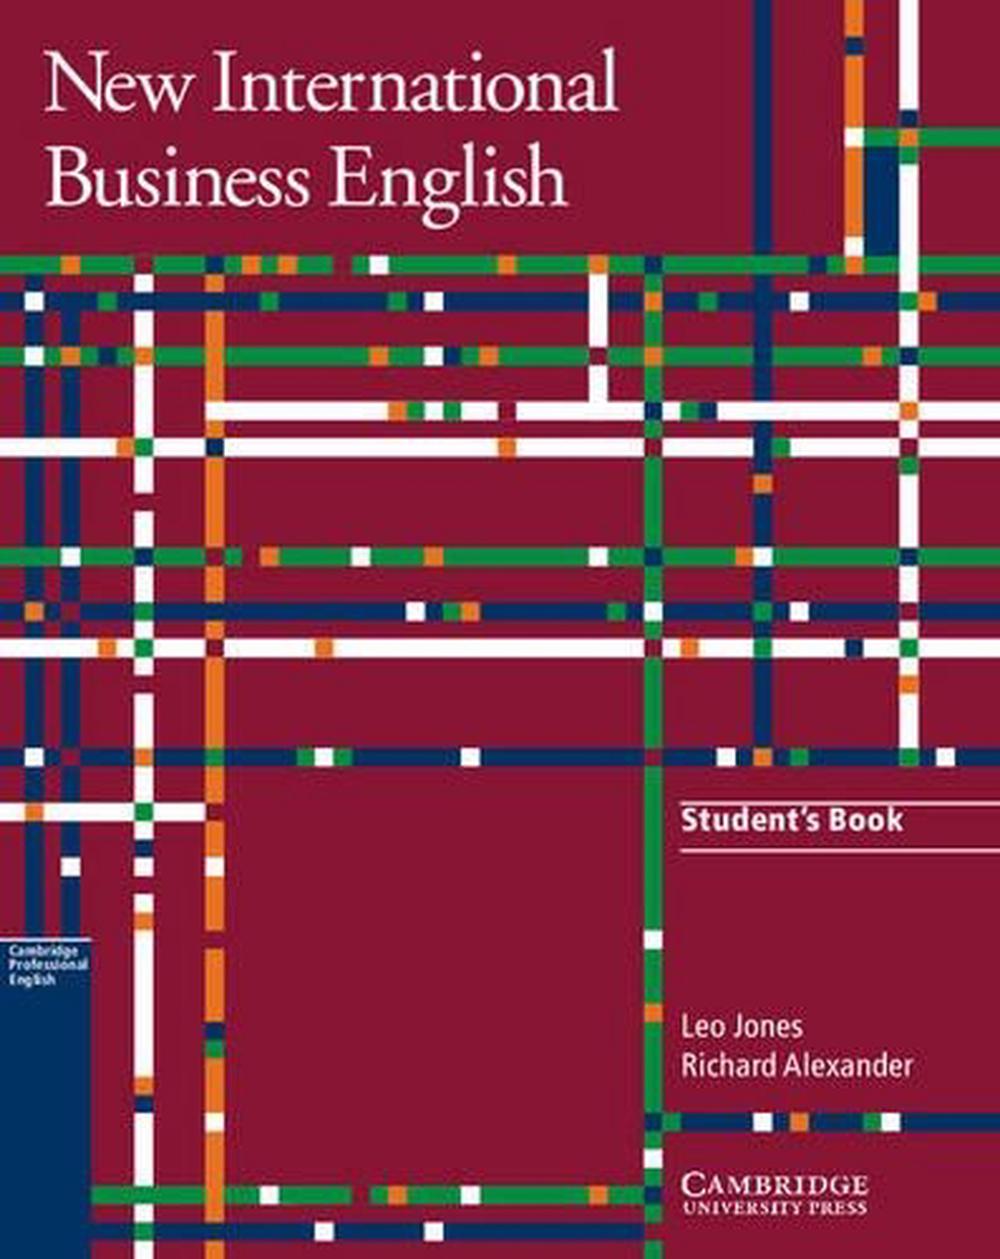 Business　English　9781107632219　New　Book　Buy　by　online　Leo　Student's　Paperback,　at　The　Nile　International　Jones,